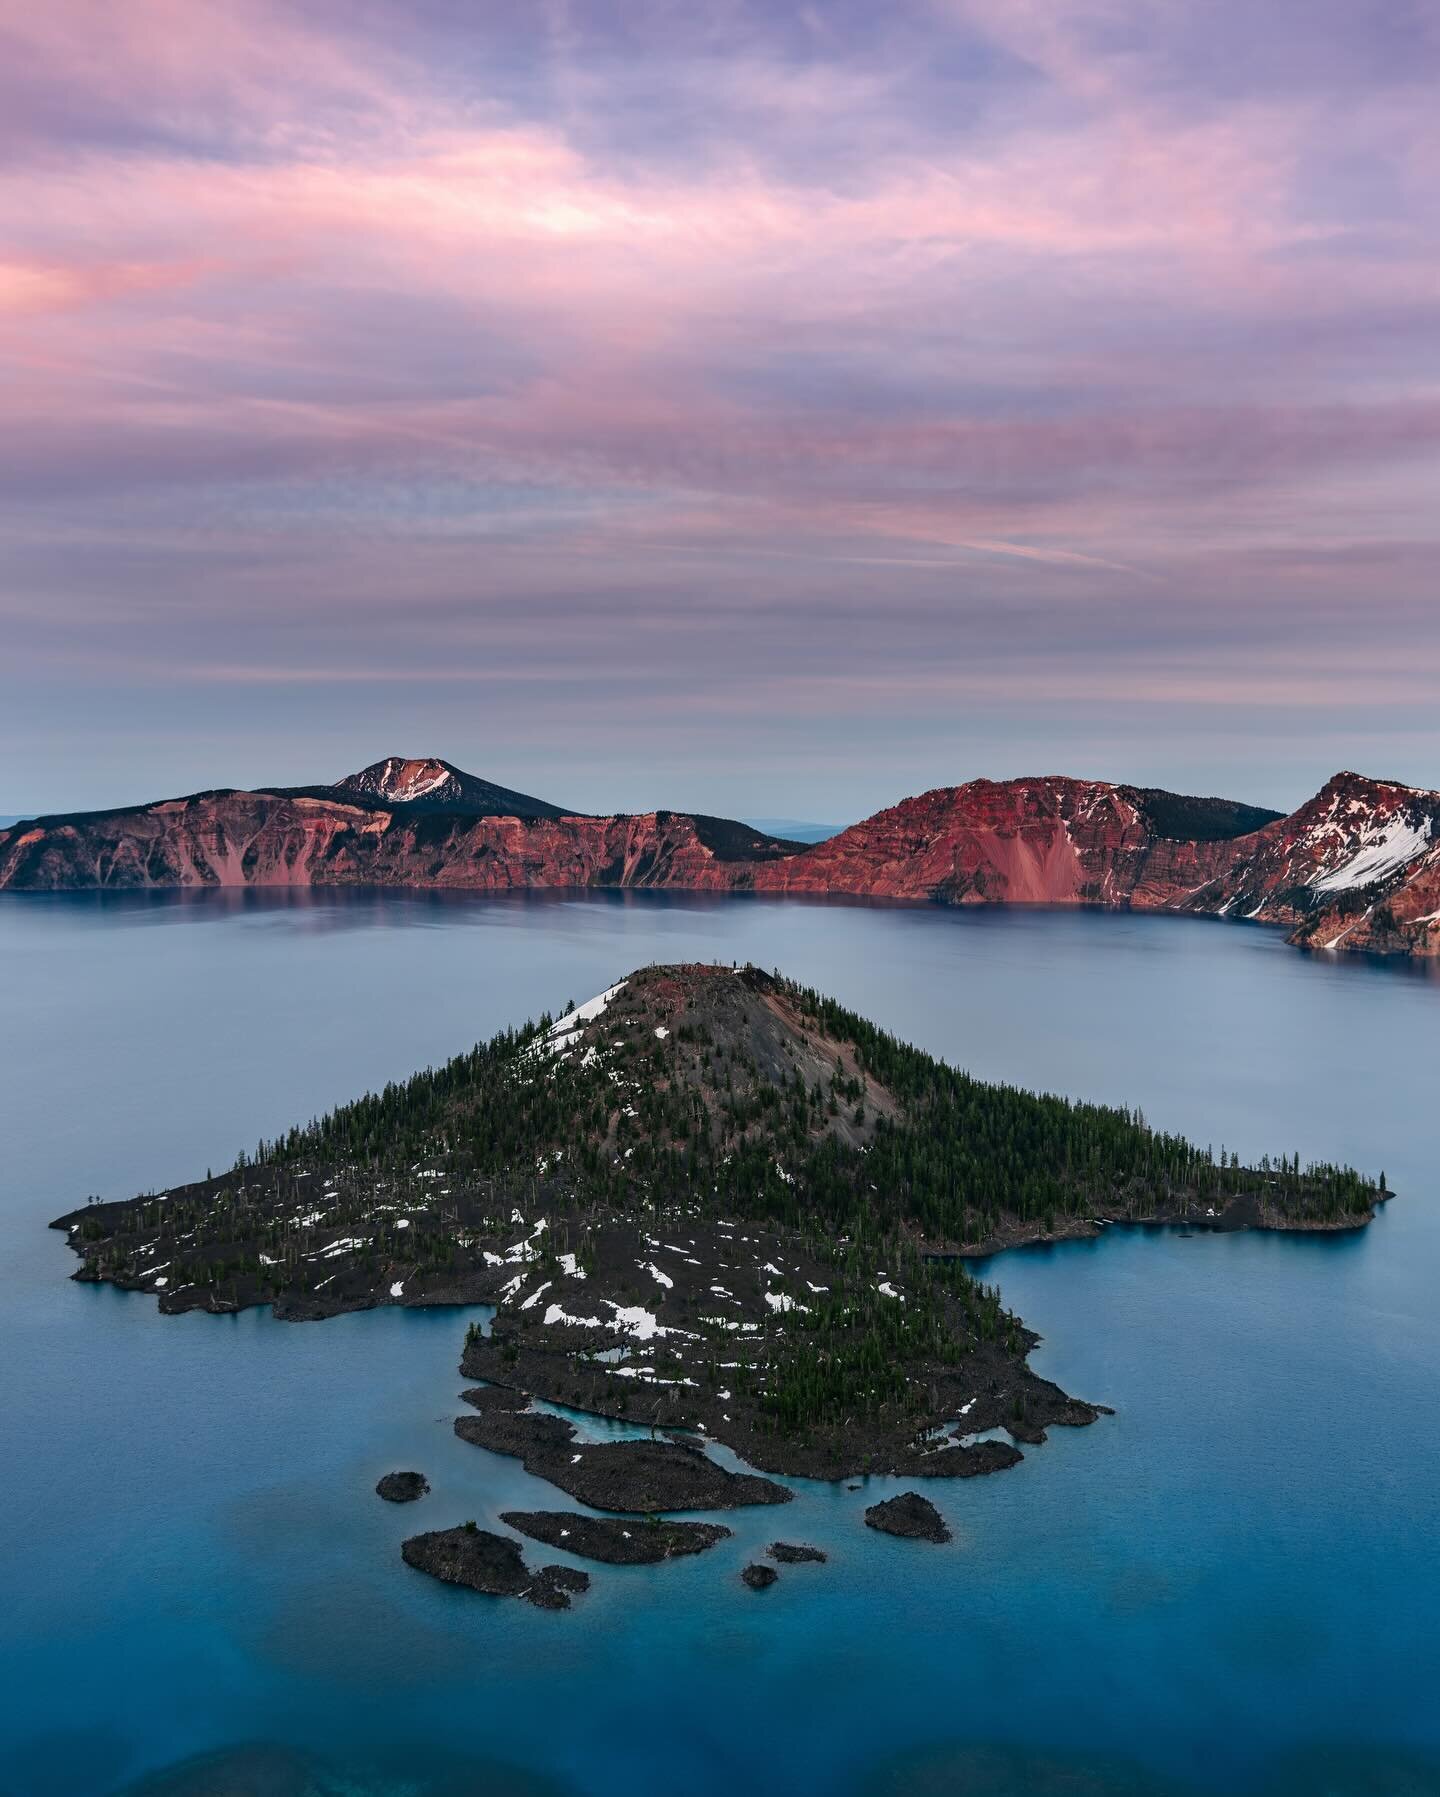 🌄 HAPPY NEW YEAR 🎇 

After finding some timelapses of Crater Lake last night, for my New Years Eve Reel, I came across a few of my favorites images from up there. This image was close to this same time of year a couple laps ago.

This place stole m